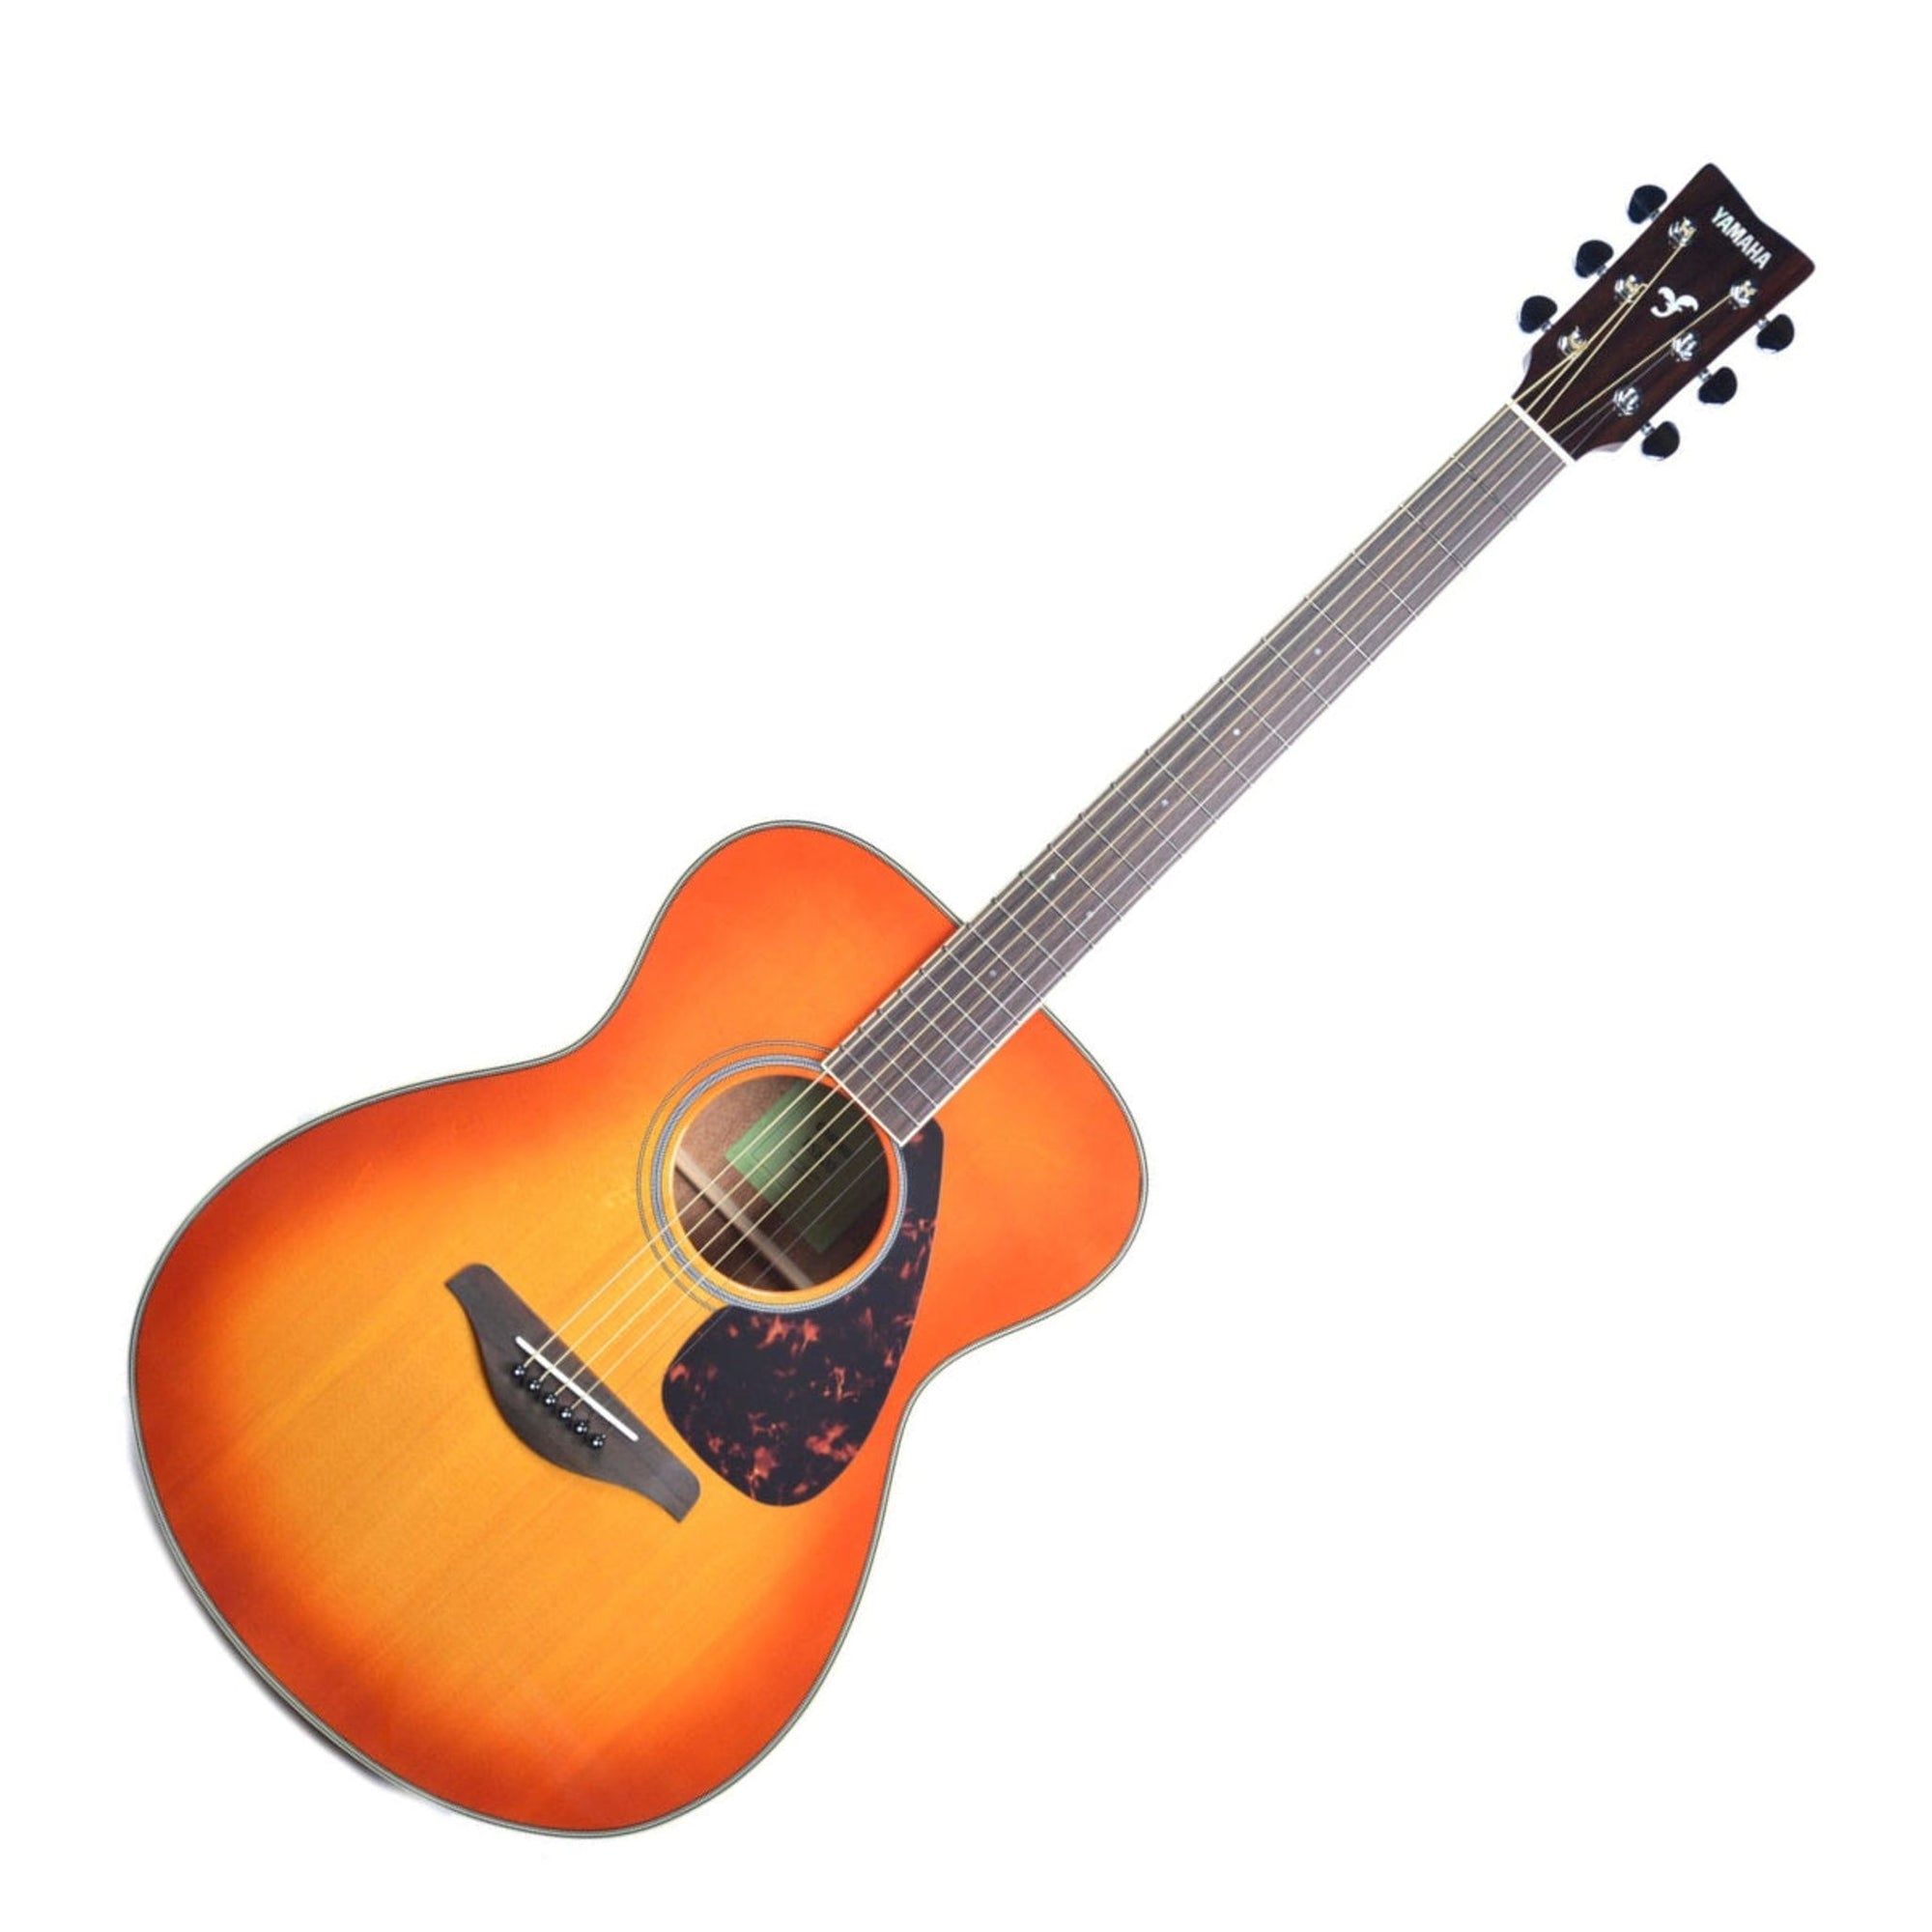 The Yamaha FS820 folk guitar features a small body a solid spruce top ensures a bright, clear tone, and the mahogany back and sides provide added warmth. Perfect for smaller players, and those wanting a portable option.